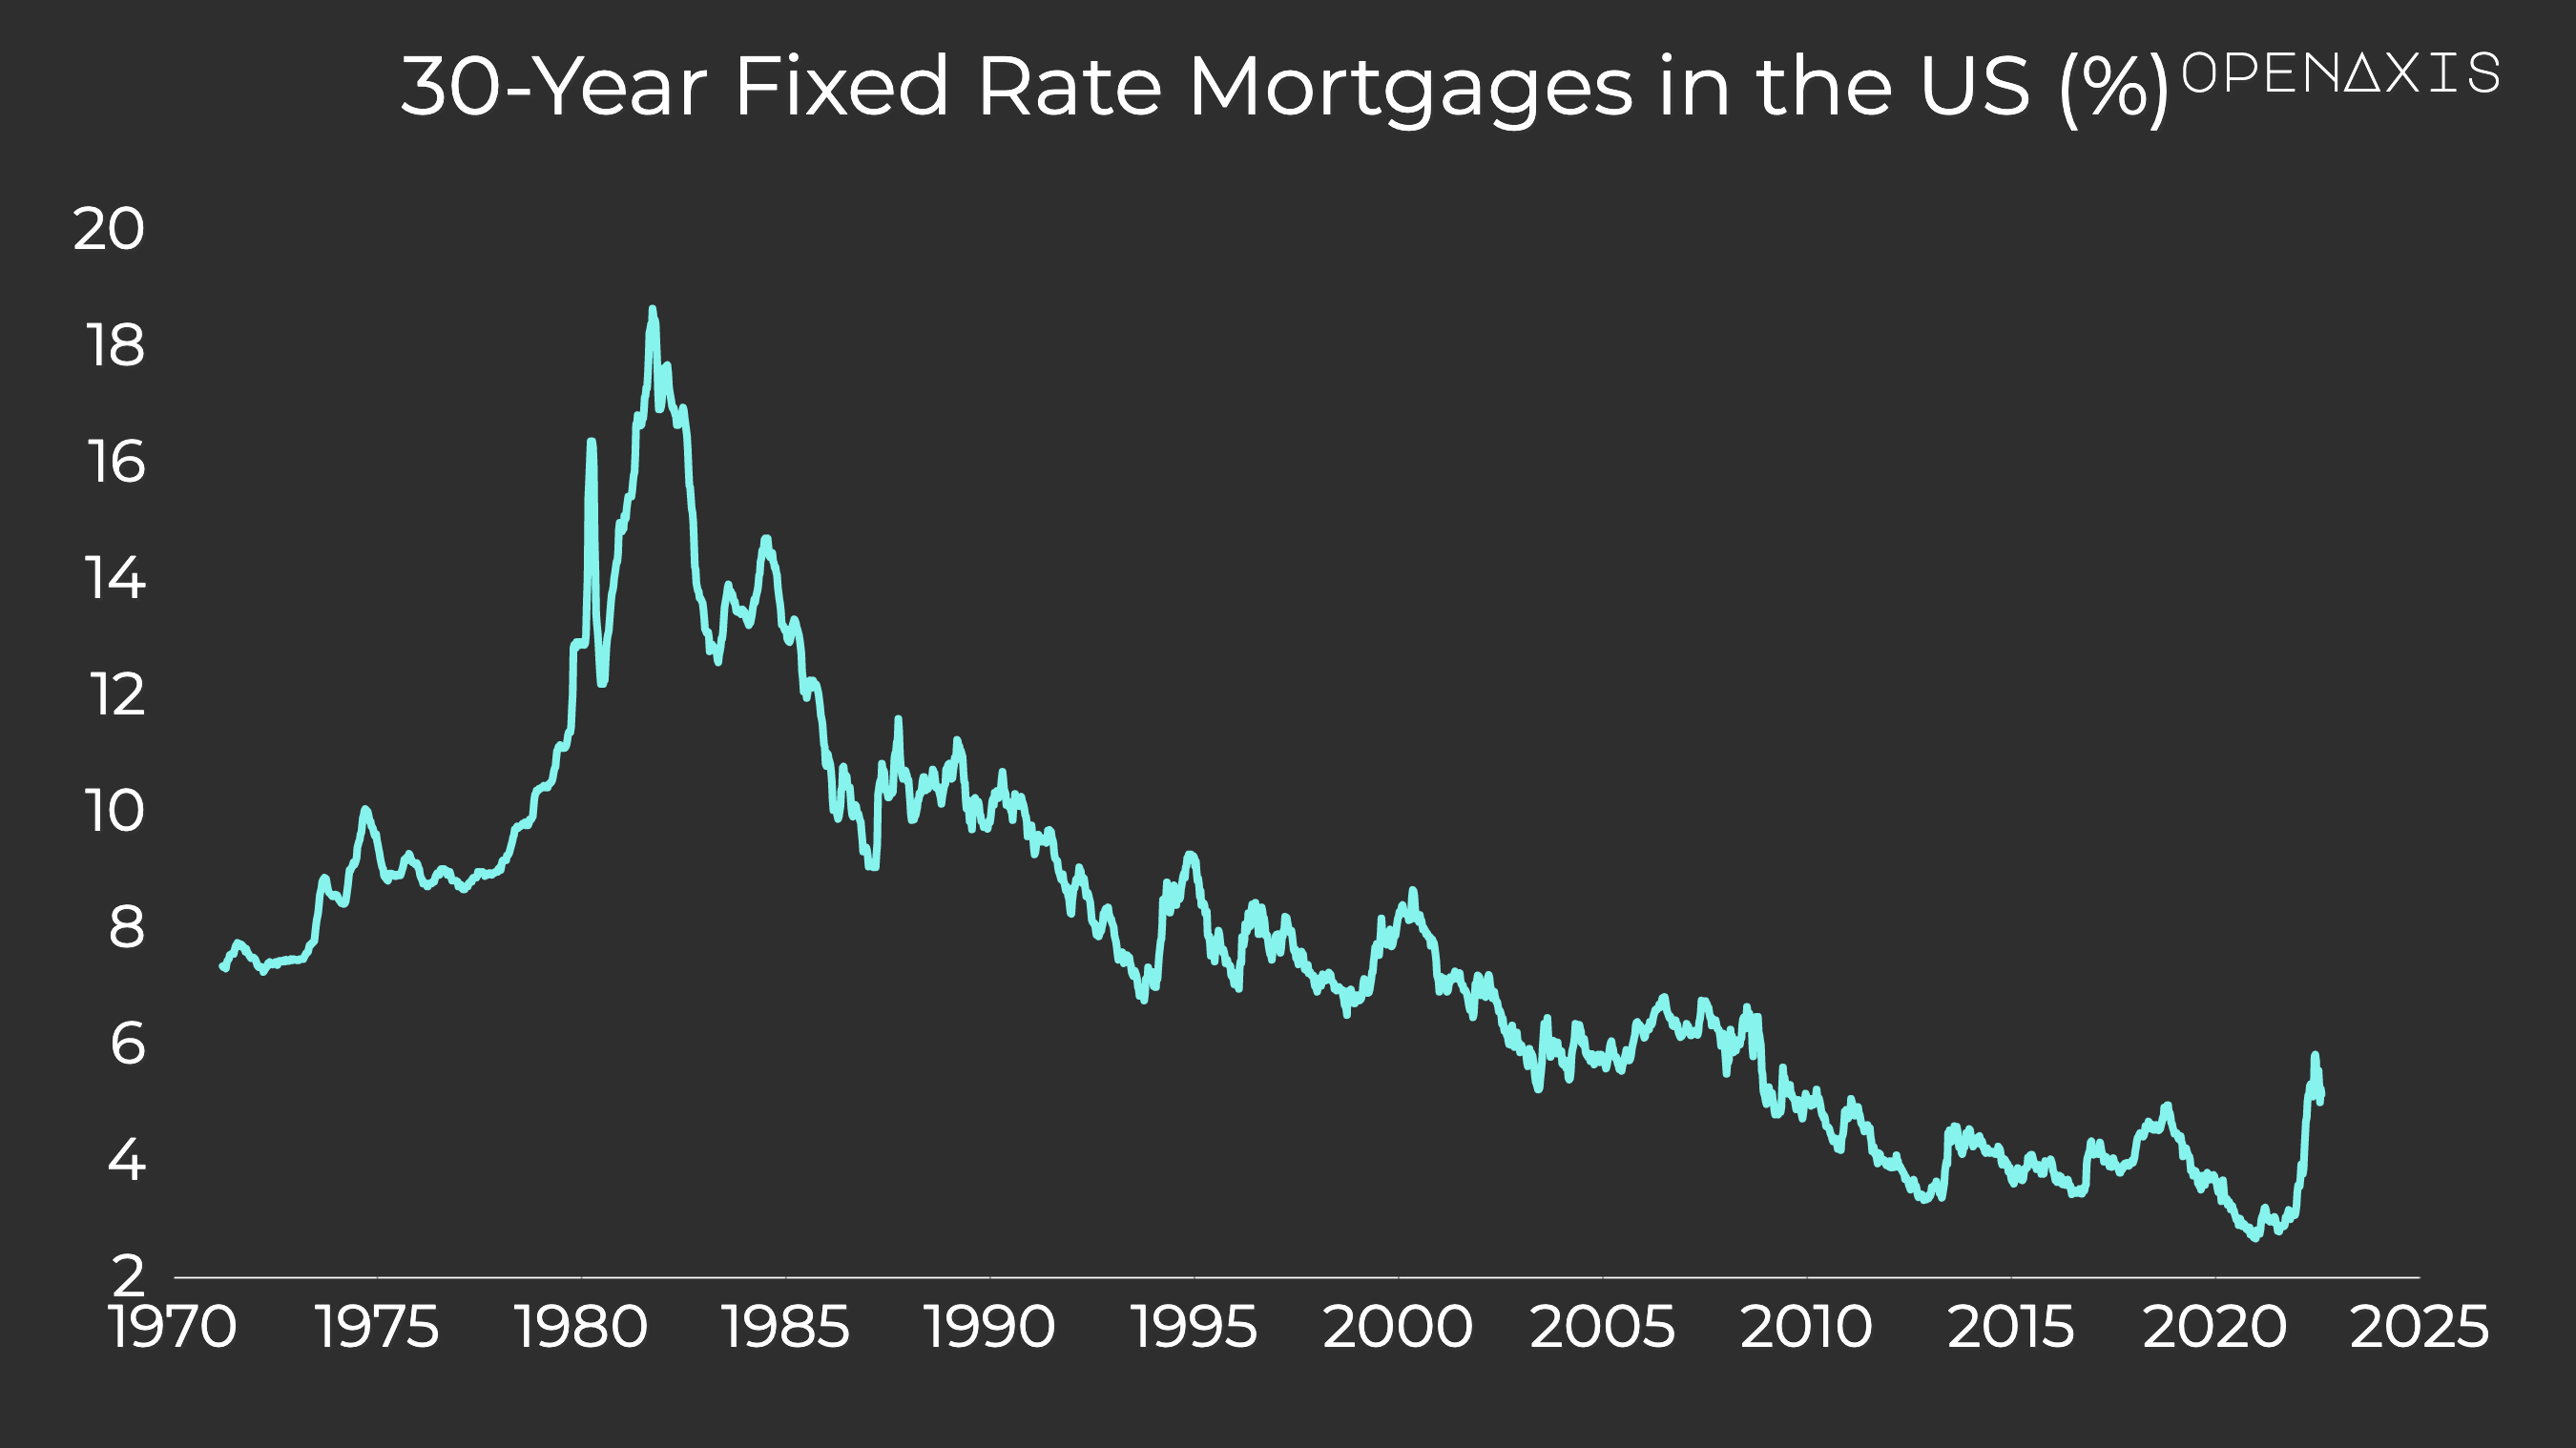 "30-Year Fixed Rate Mortgages in the US (%)"